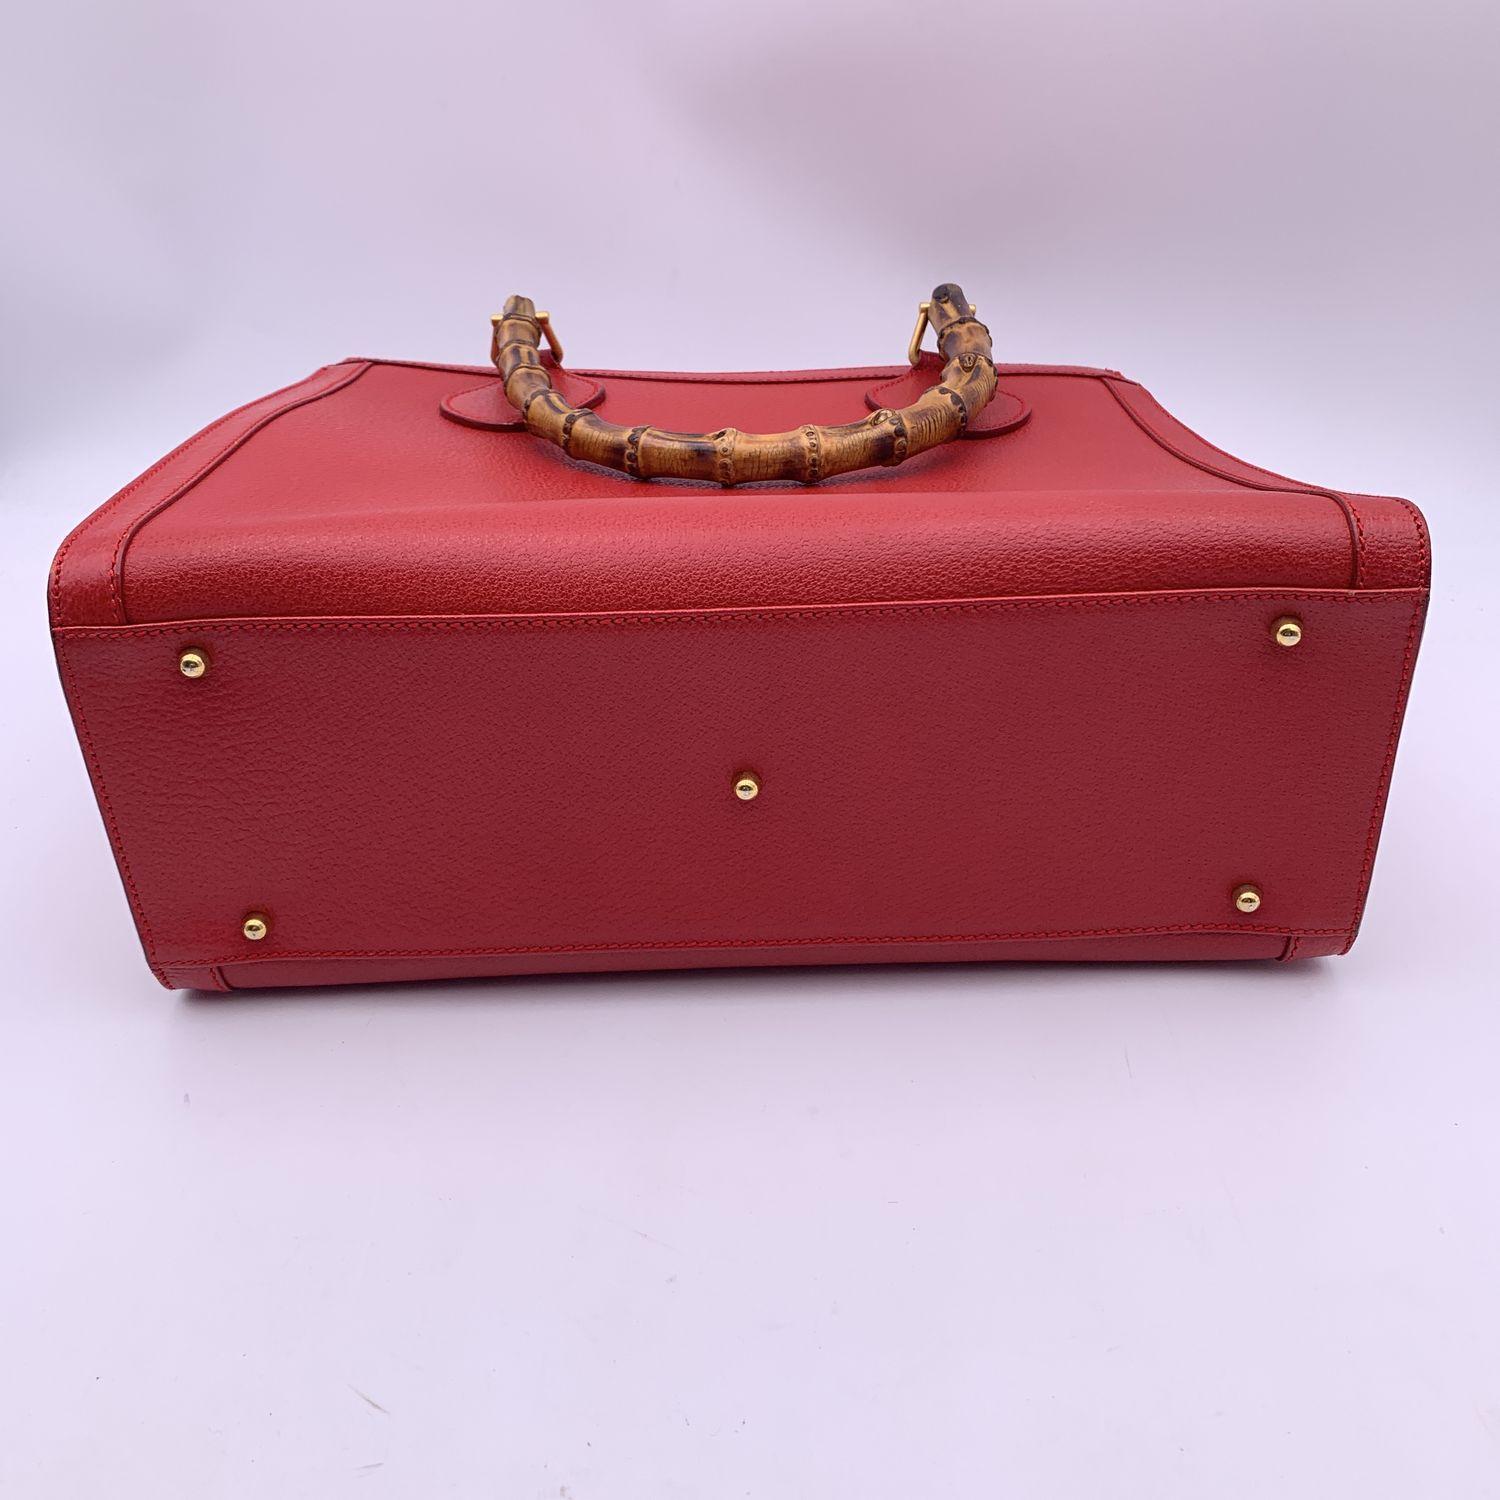 Beautiful Gucci Bamboo tote bag in red leather. Double distinctive Bamboo handle. Princess Diana, was snapped carrying a this model on several occasions. Magnetic button closure on top. 5 bottom feet. Gold metal hardware. 2 main compartments and 1